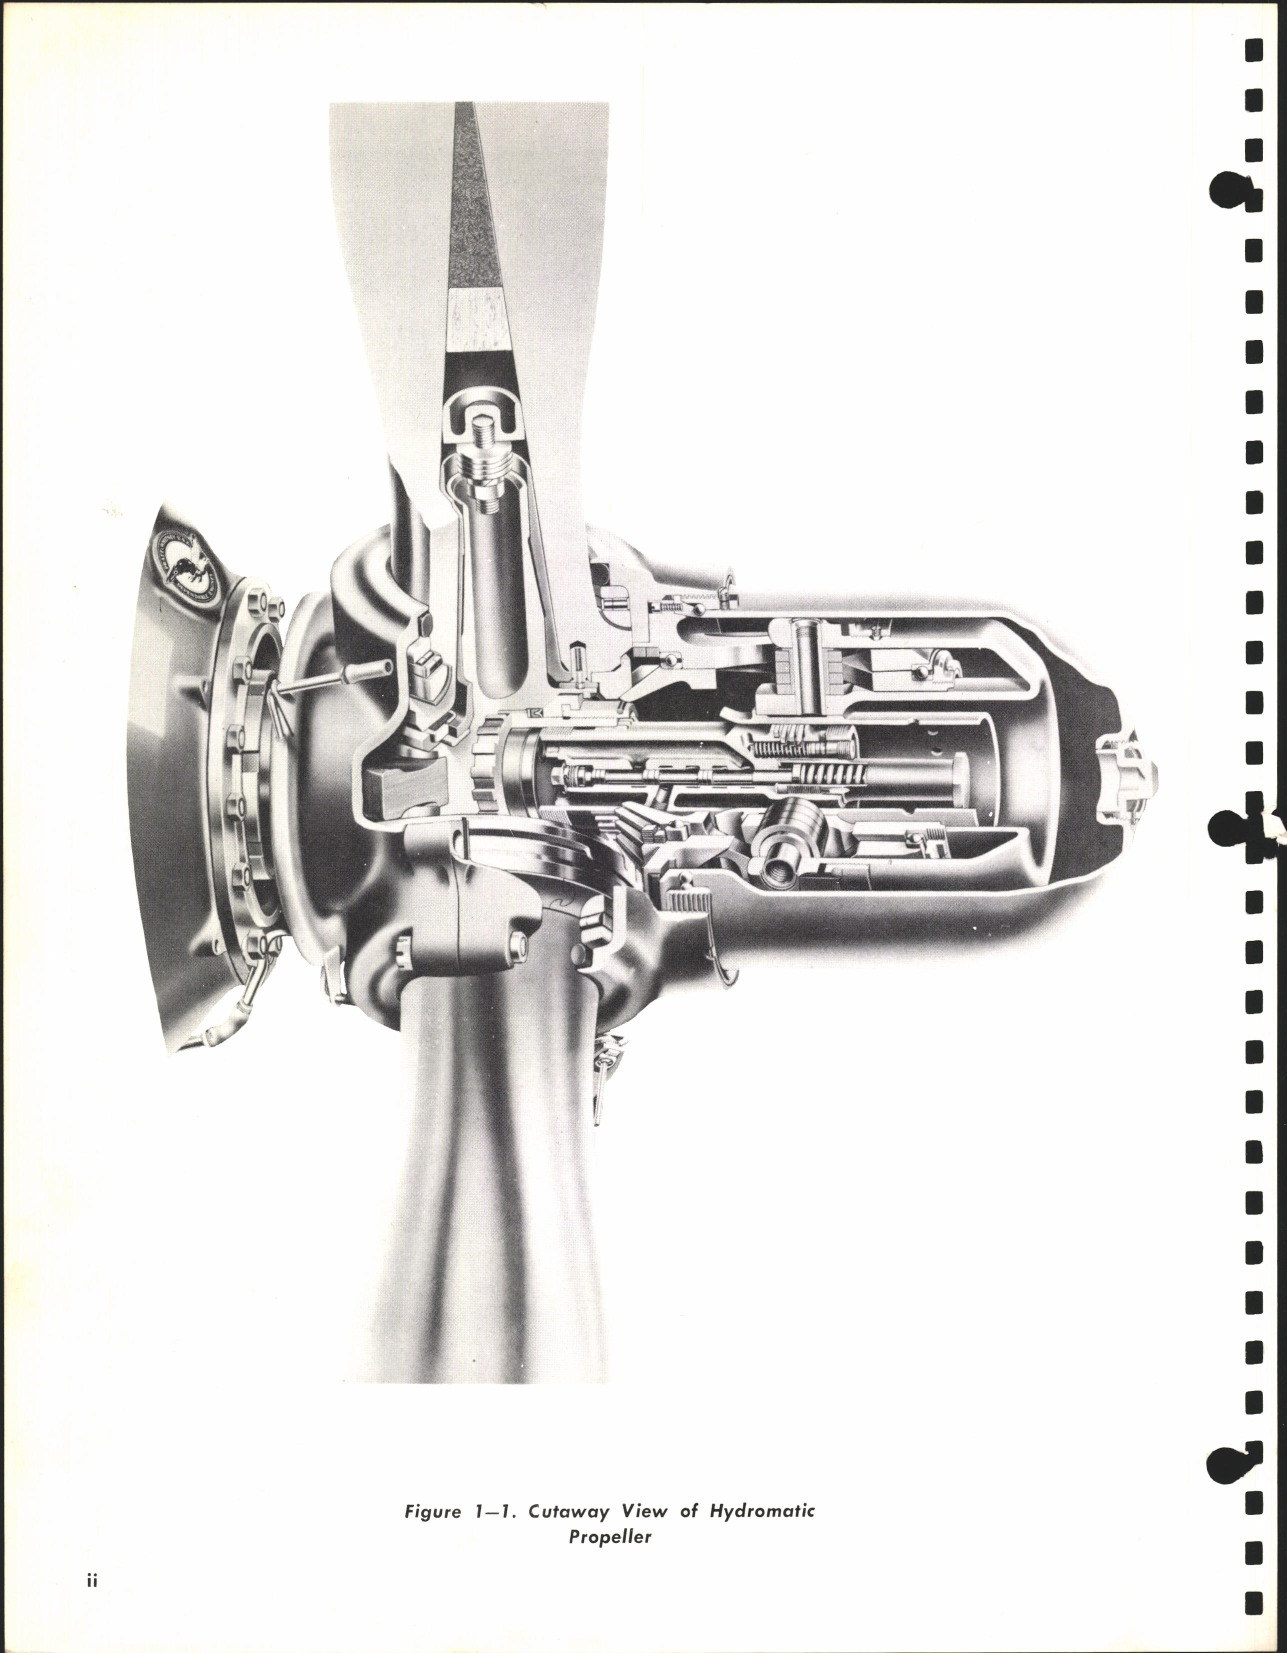 Sample page 6 from AirCorps Library document: Overhaul Manual for Hydromatic Propeller Models 23E50, 23D40, 24D50, 33D50, and 33E60